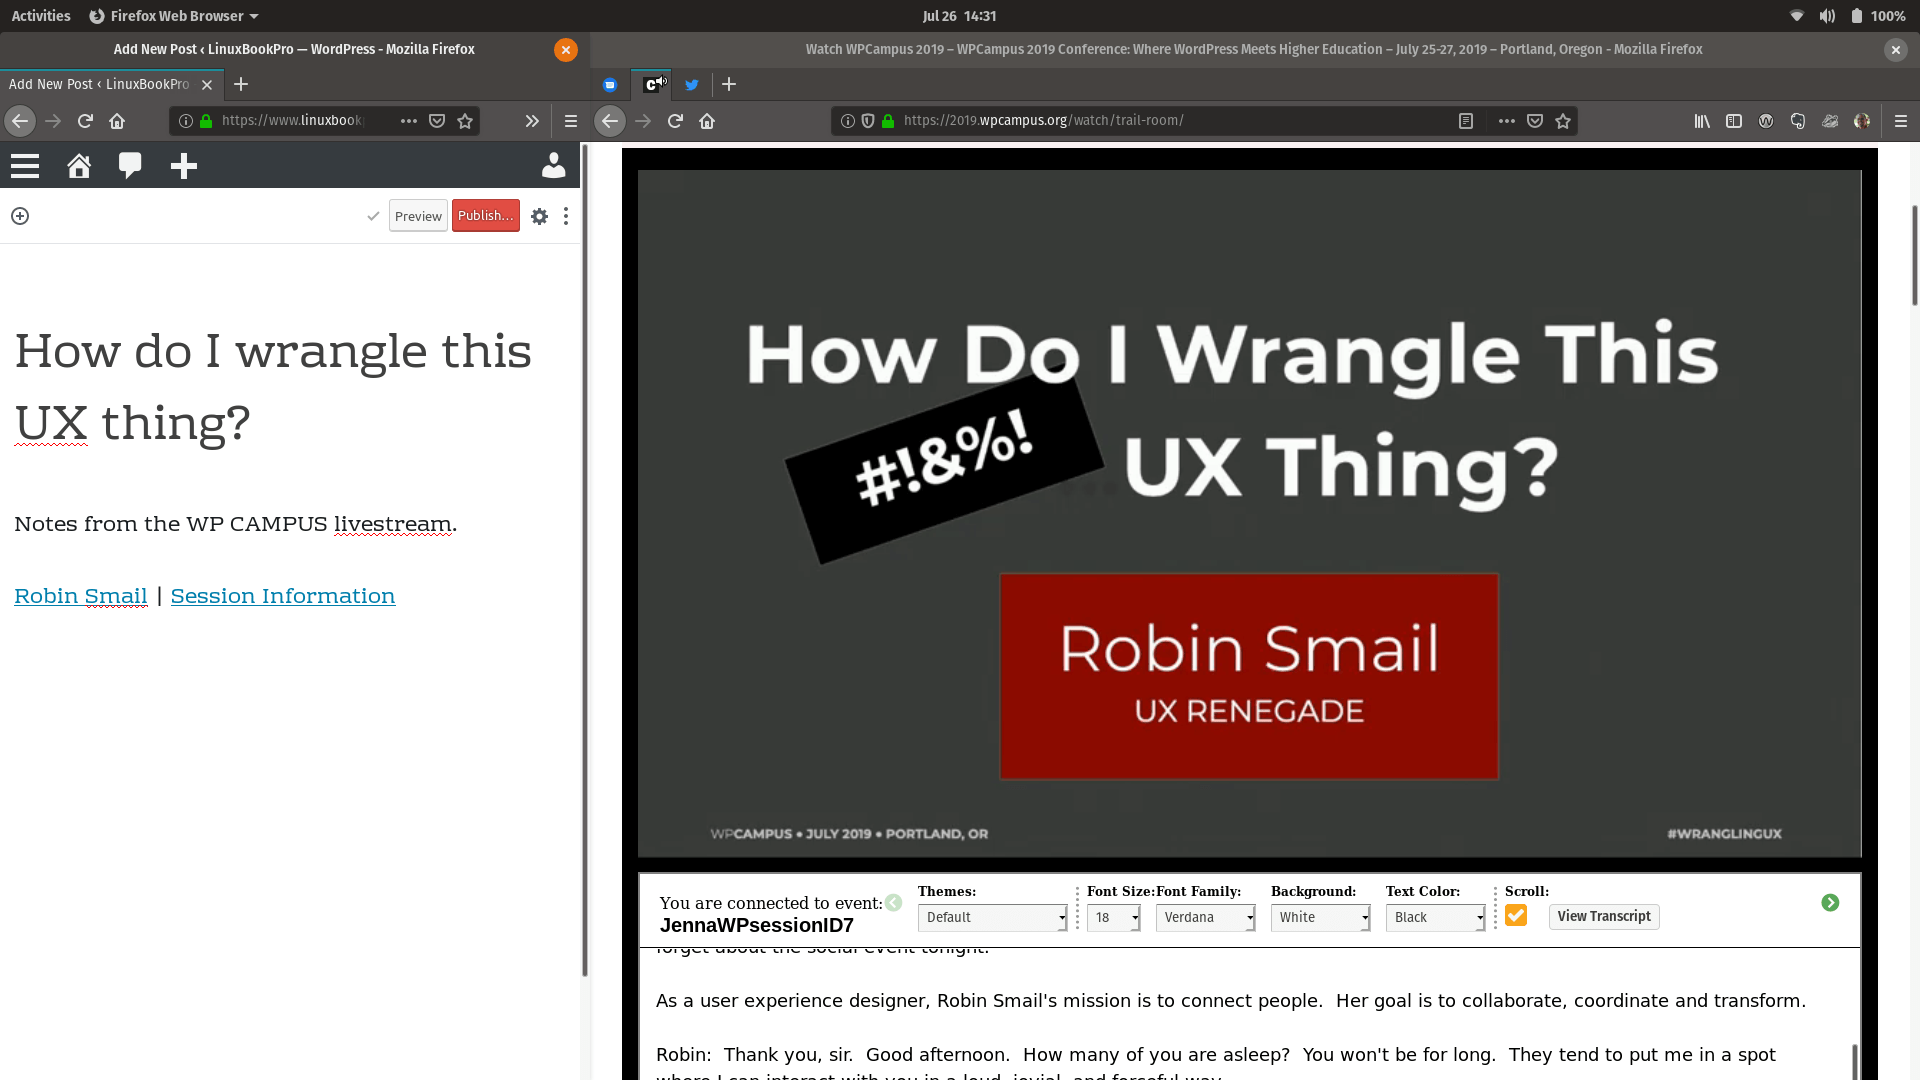 How do I wrangle this UX thing?